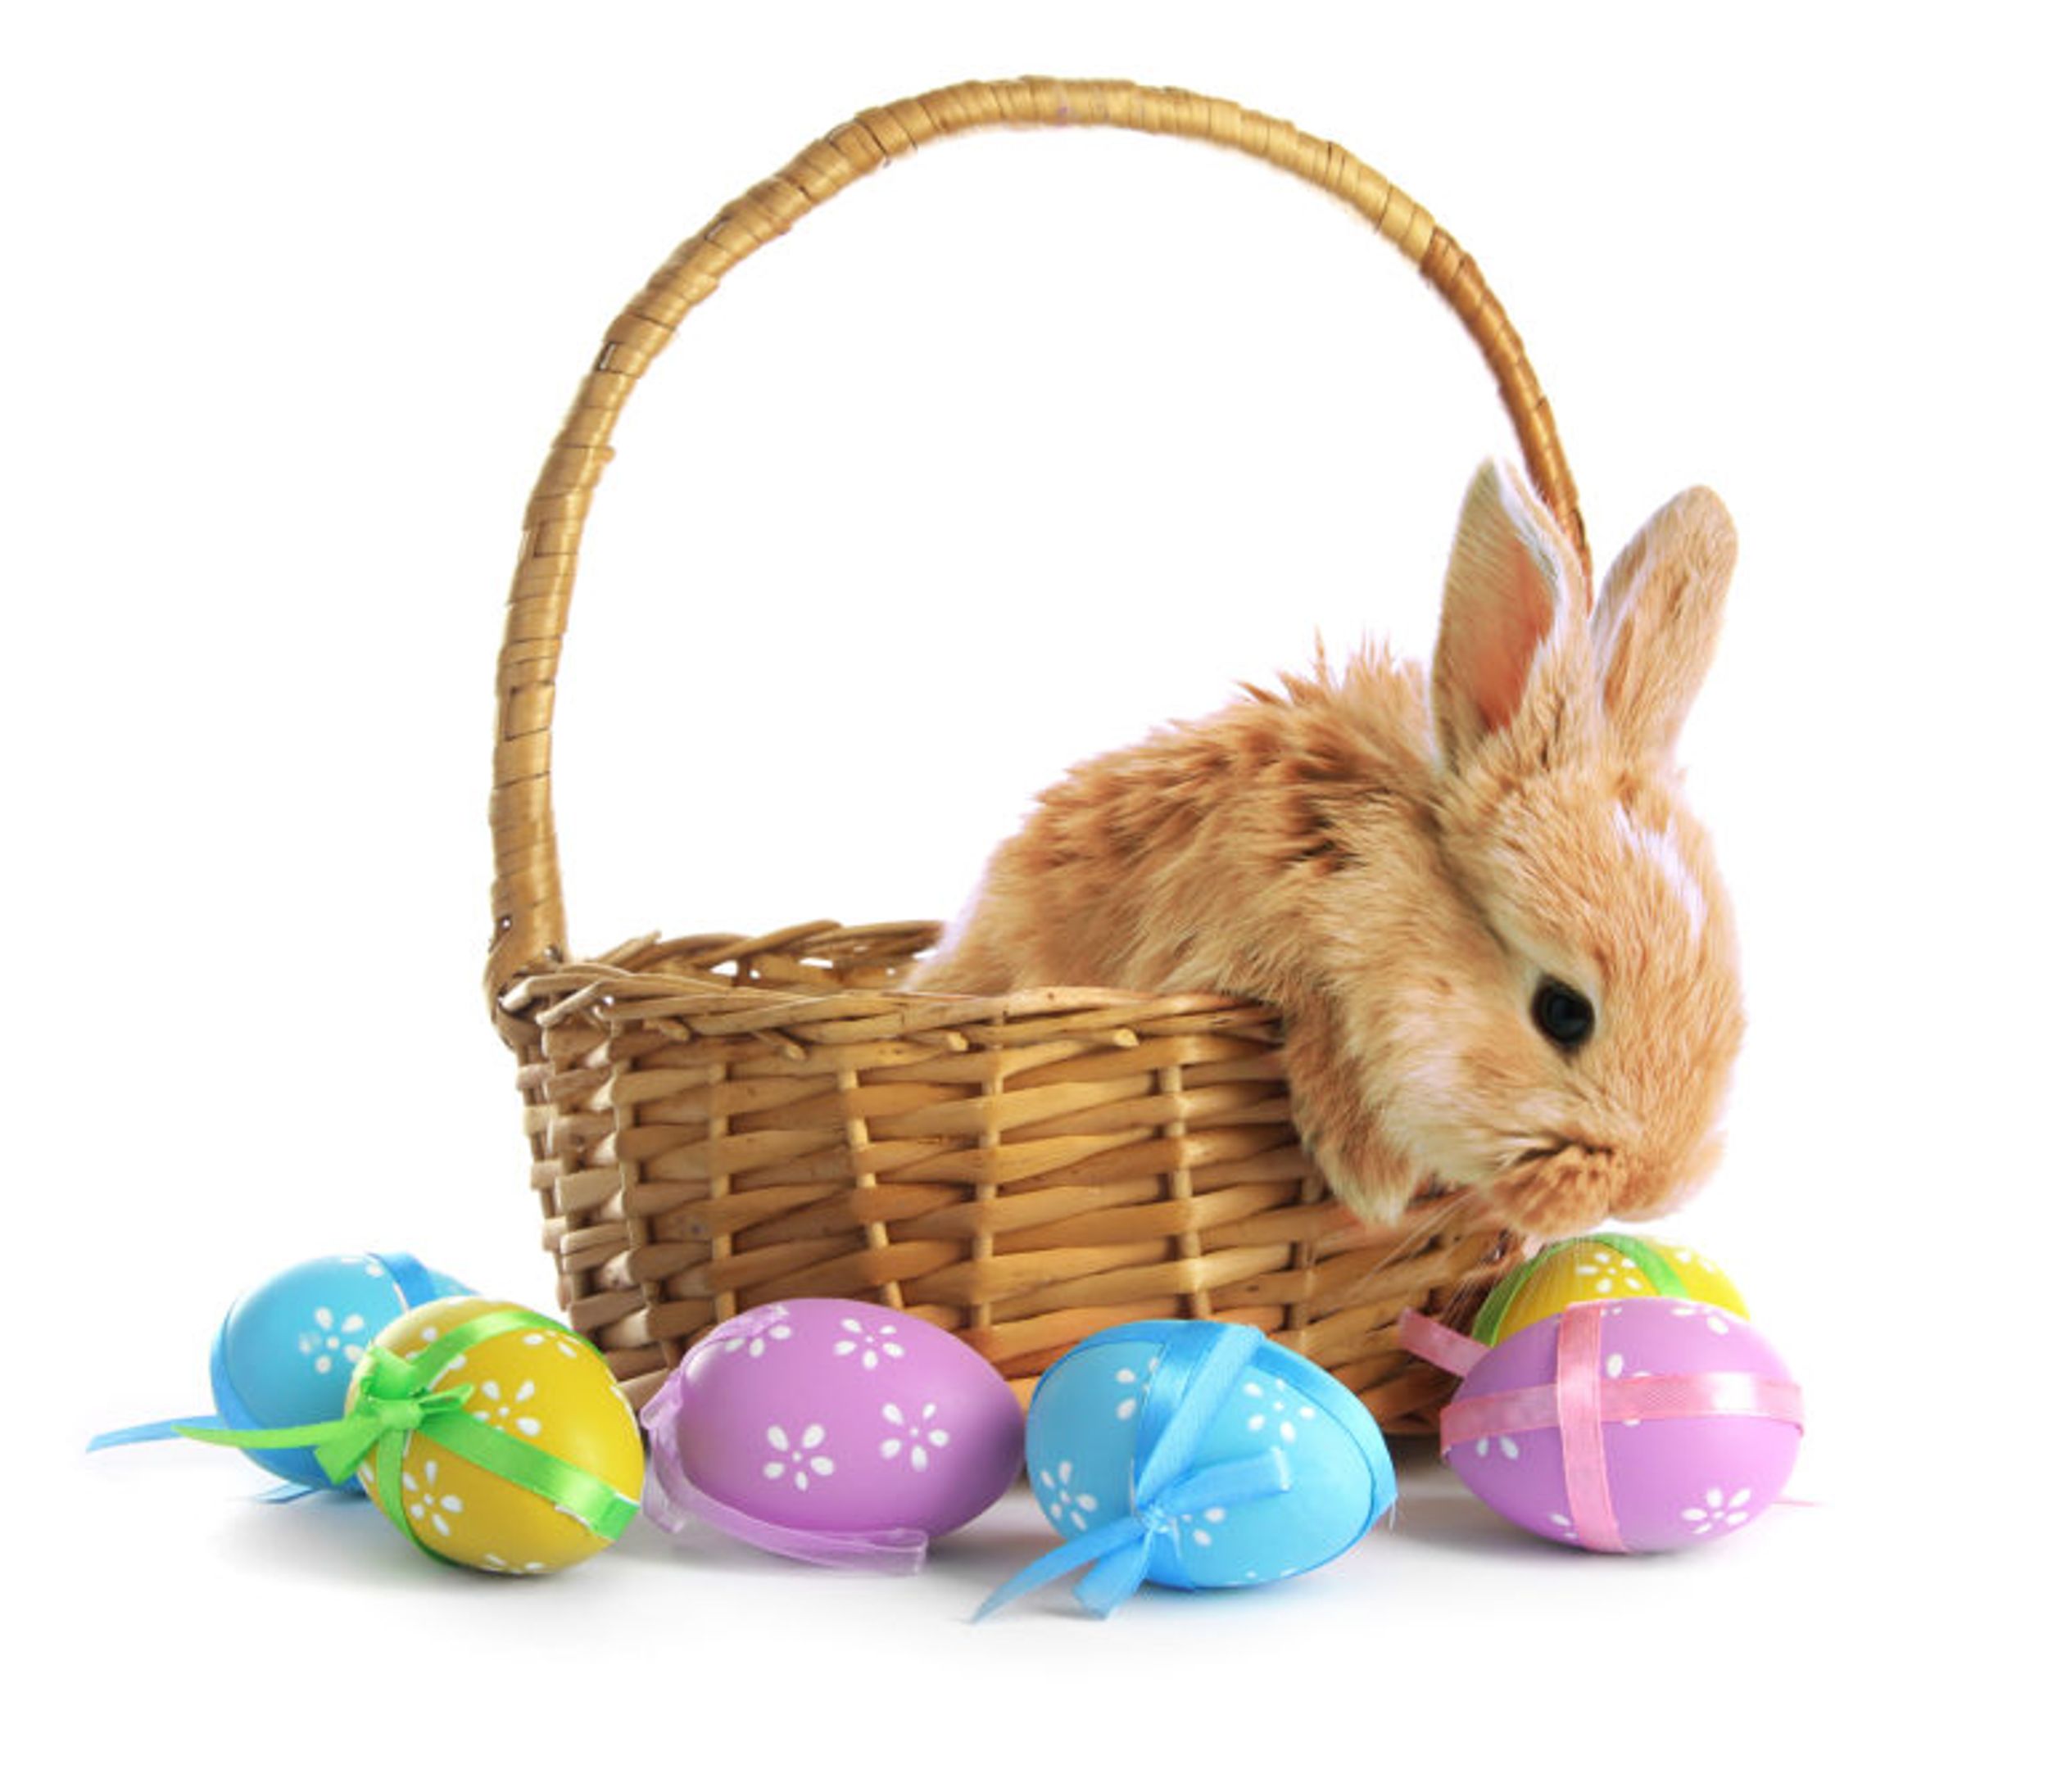 12 Things To Put In A College Kid's Easter Basket